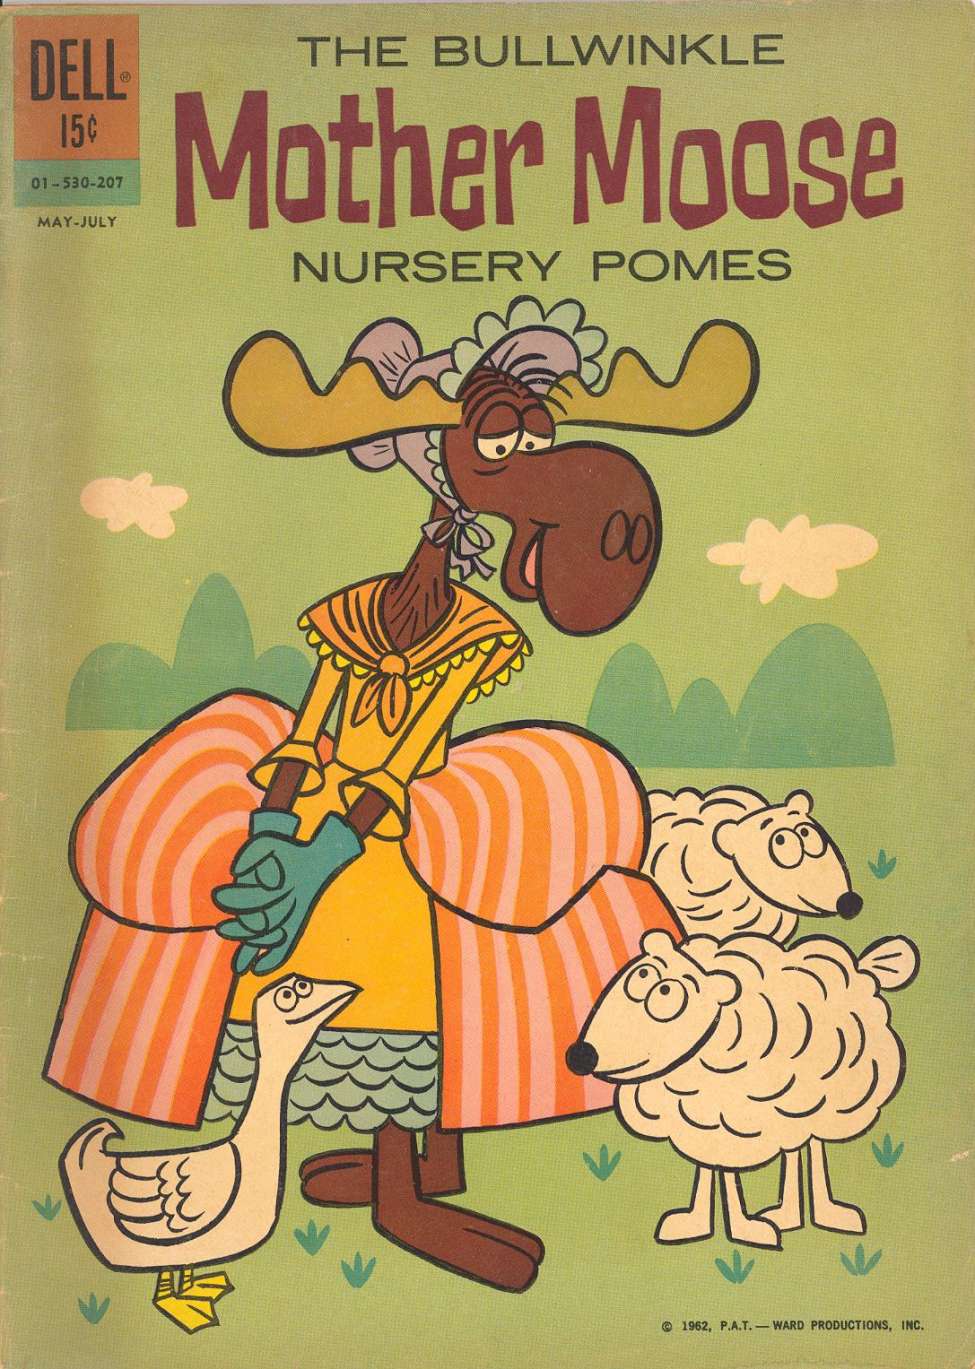 Book Cover For Bullwinkle Mother Moose Nursery Pomes 207